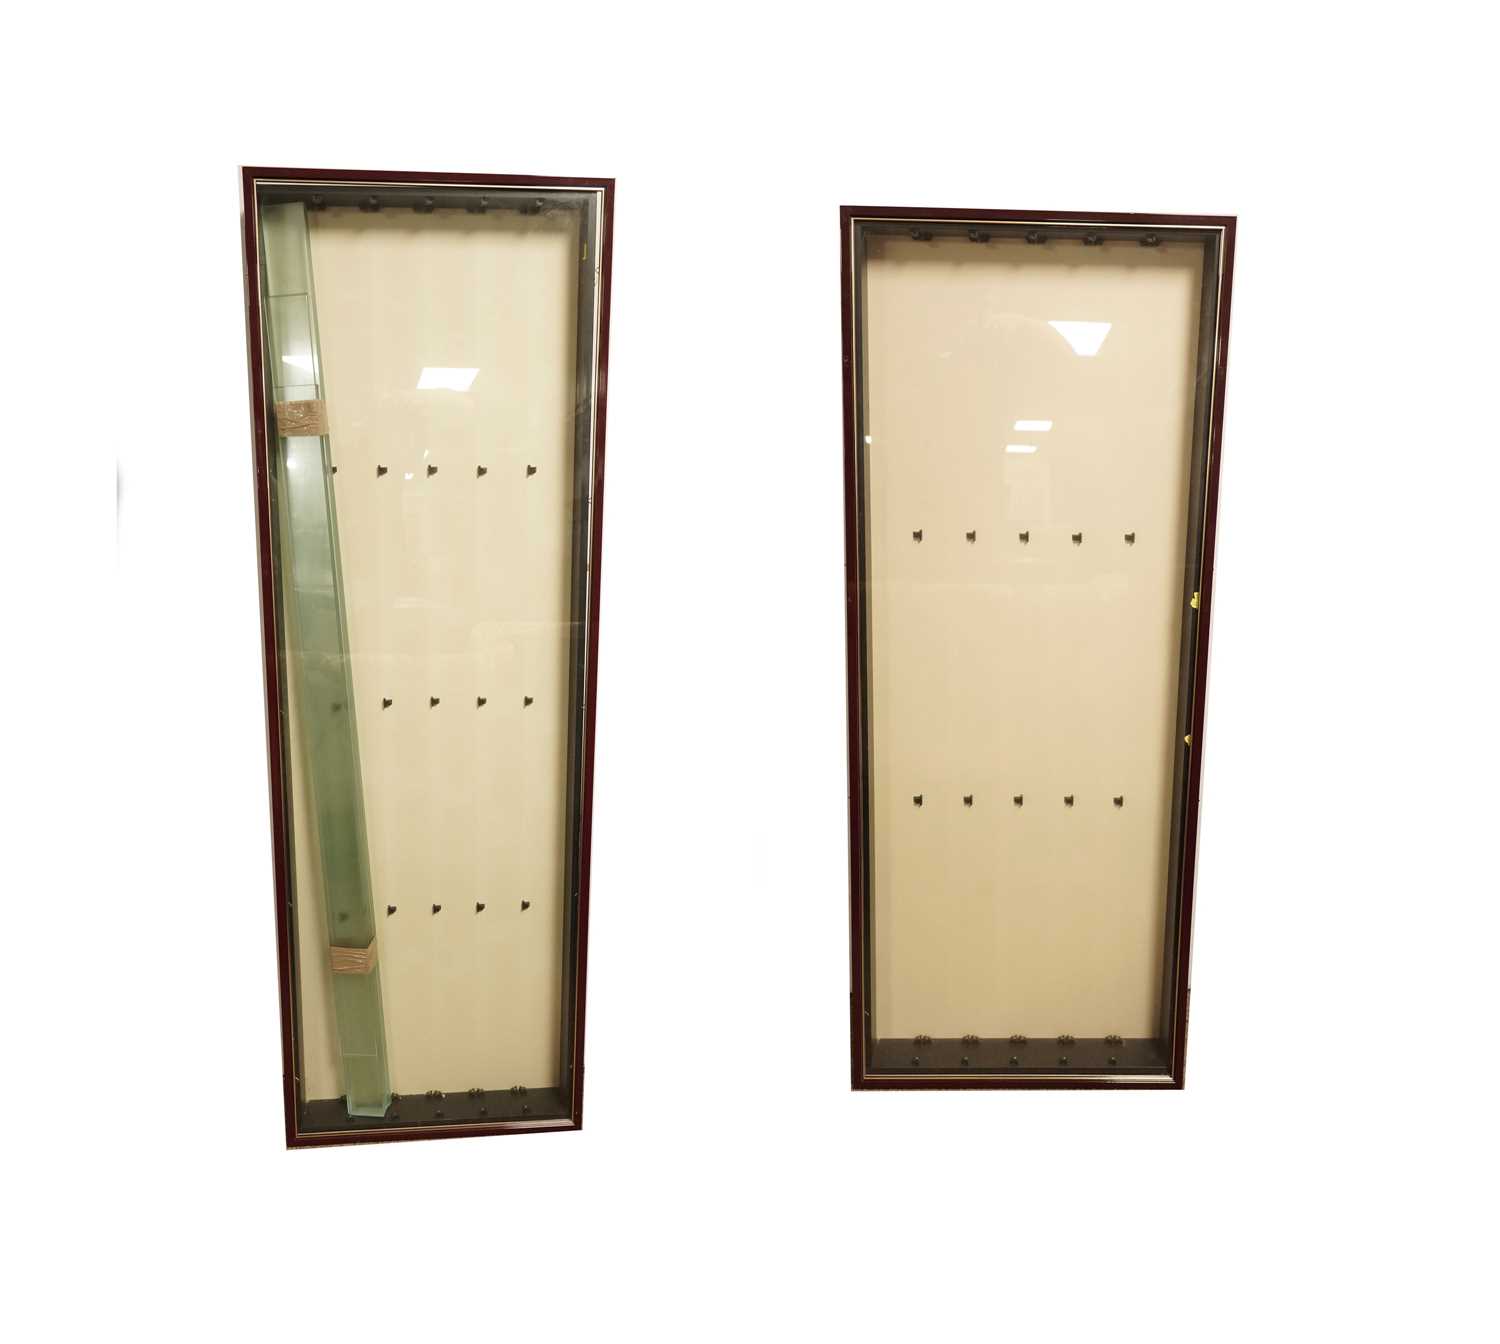 Two wall mounted display cases